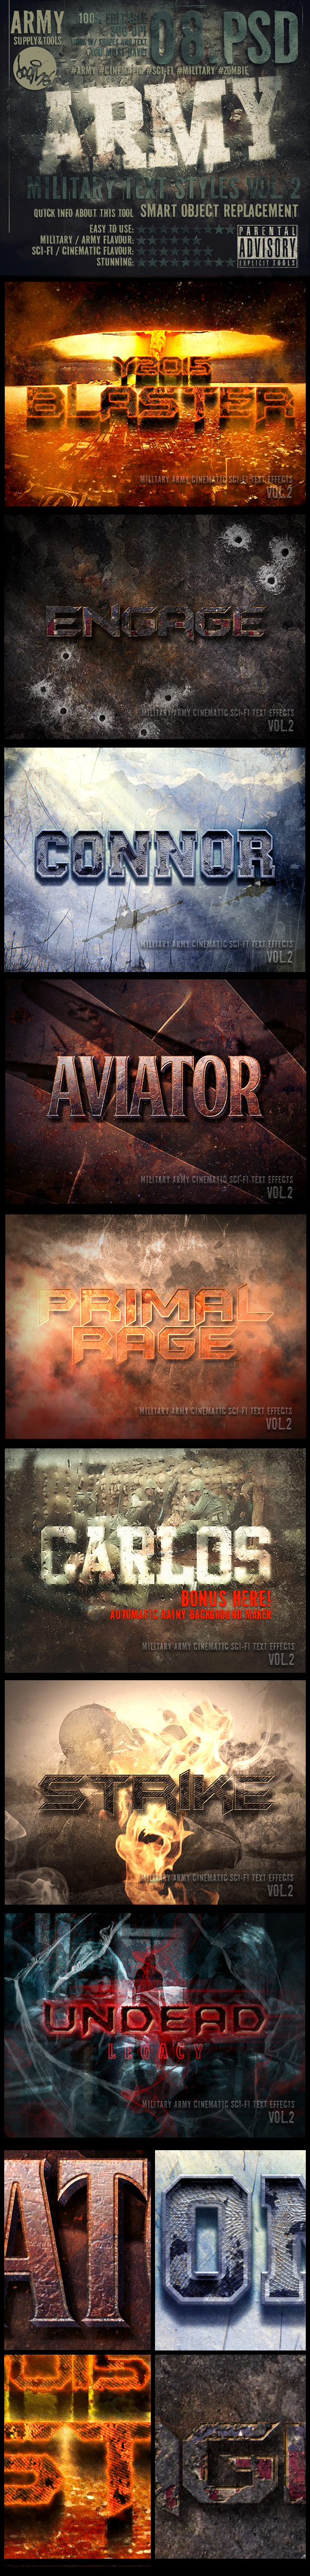 Military Army Cinematic Sci-fi Text Effects Vol.2